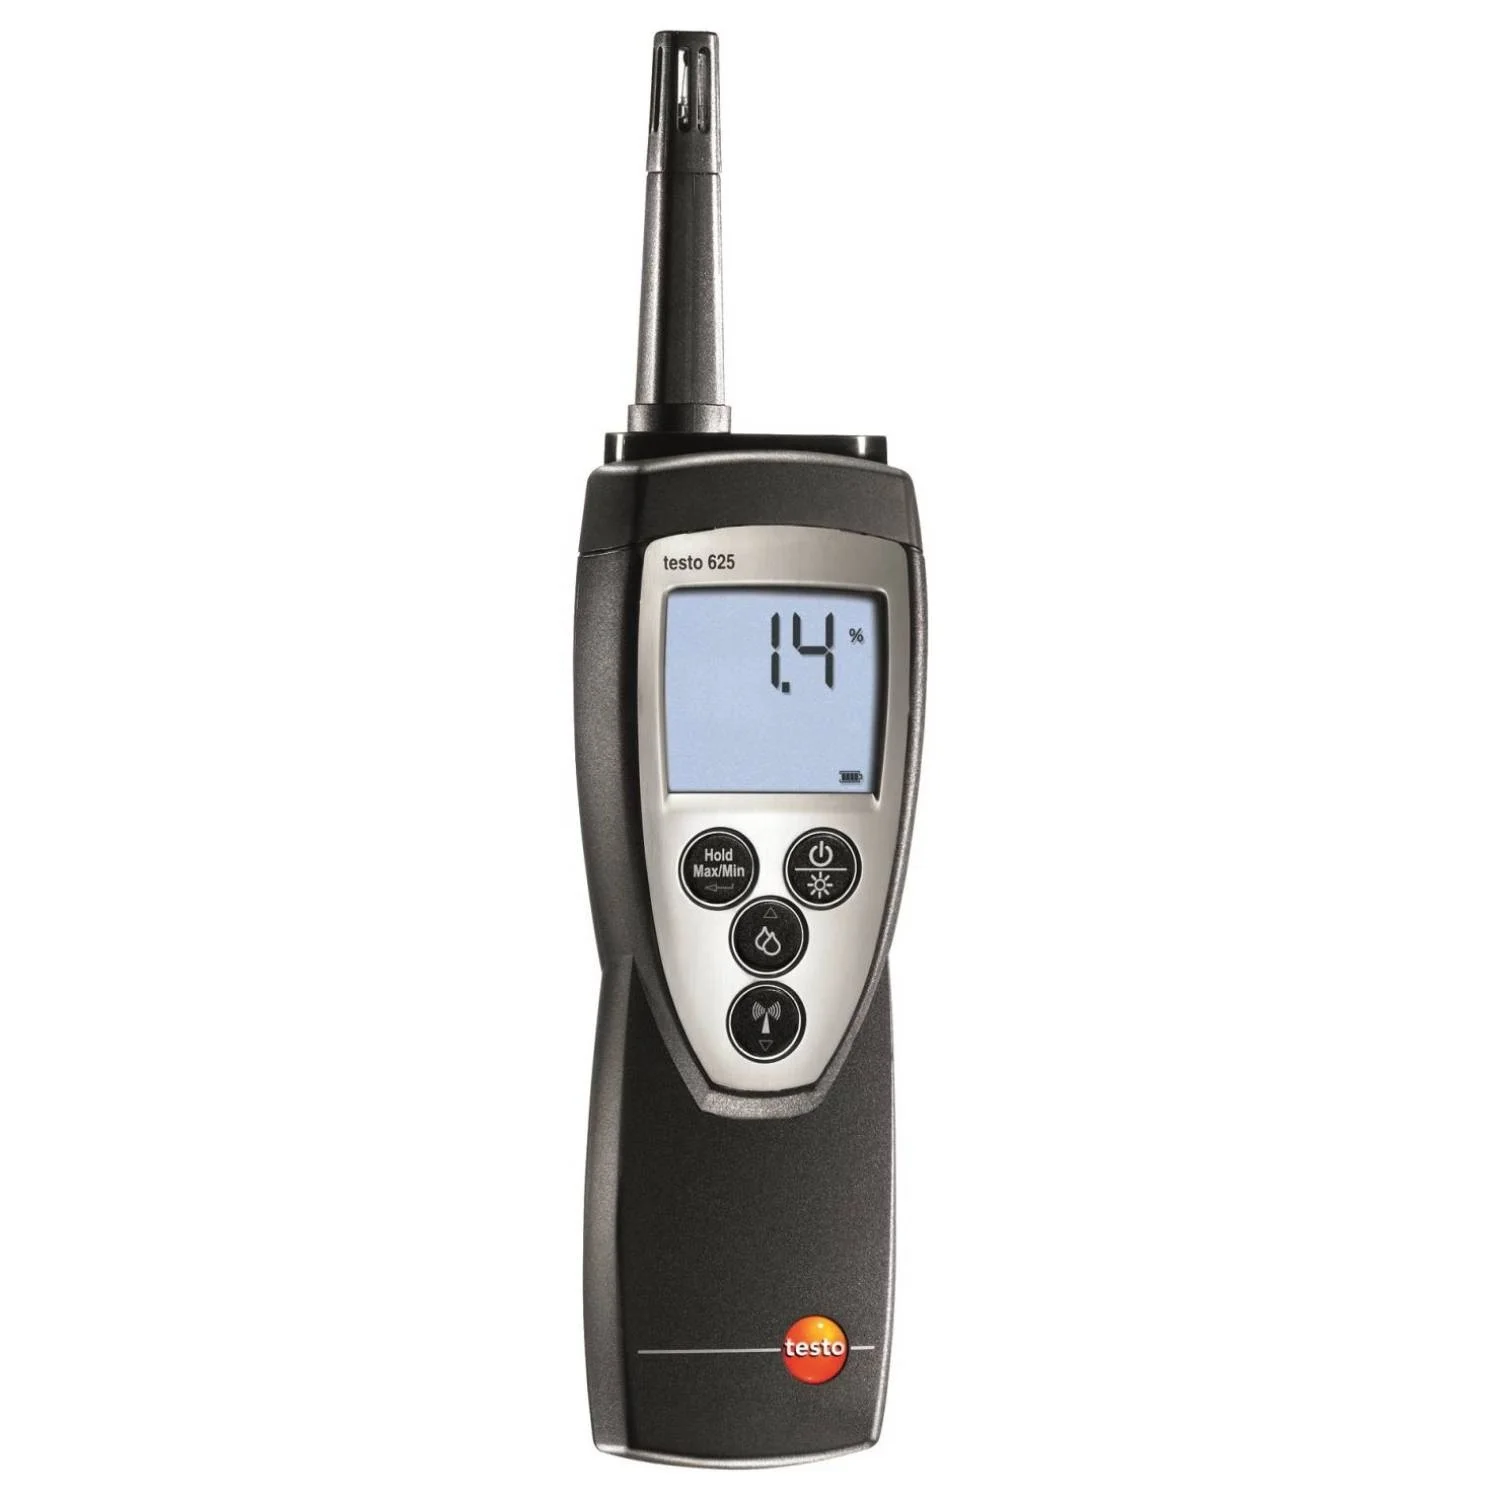 

Testo 625 Thermo-Hygrometer handheld temperature and relative humidity meter Order-Nr. 0563 6251